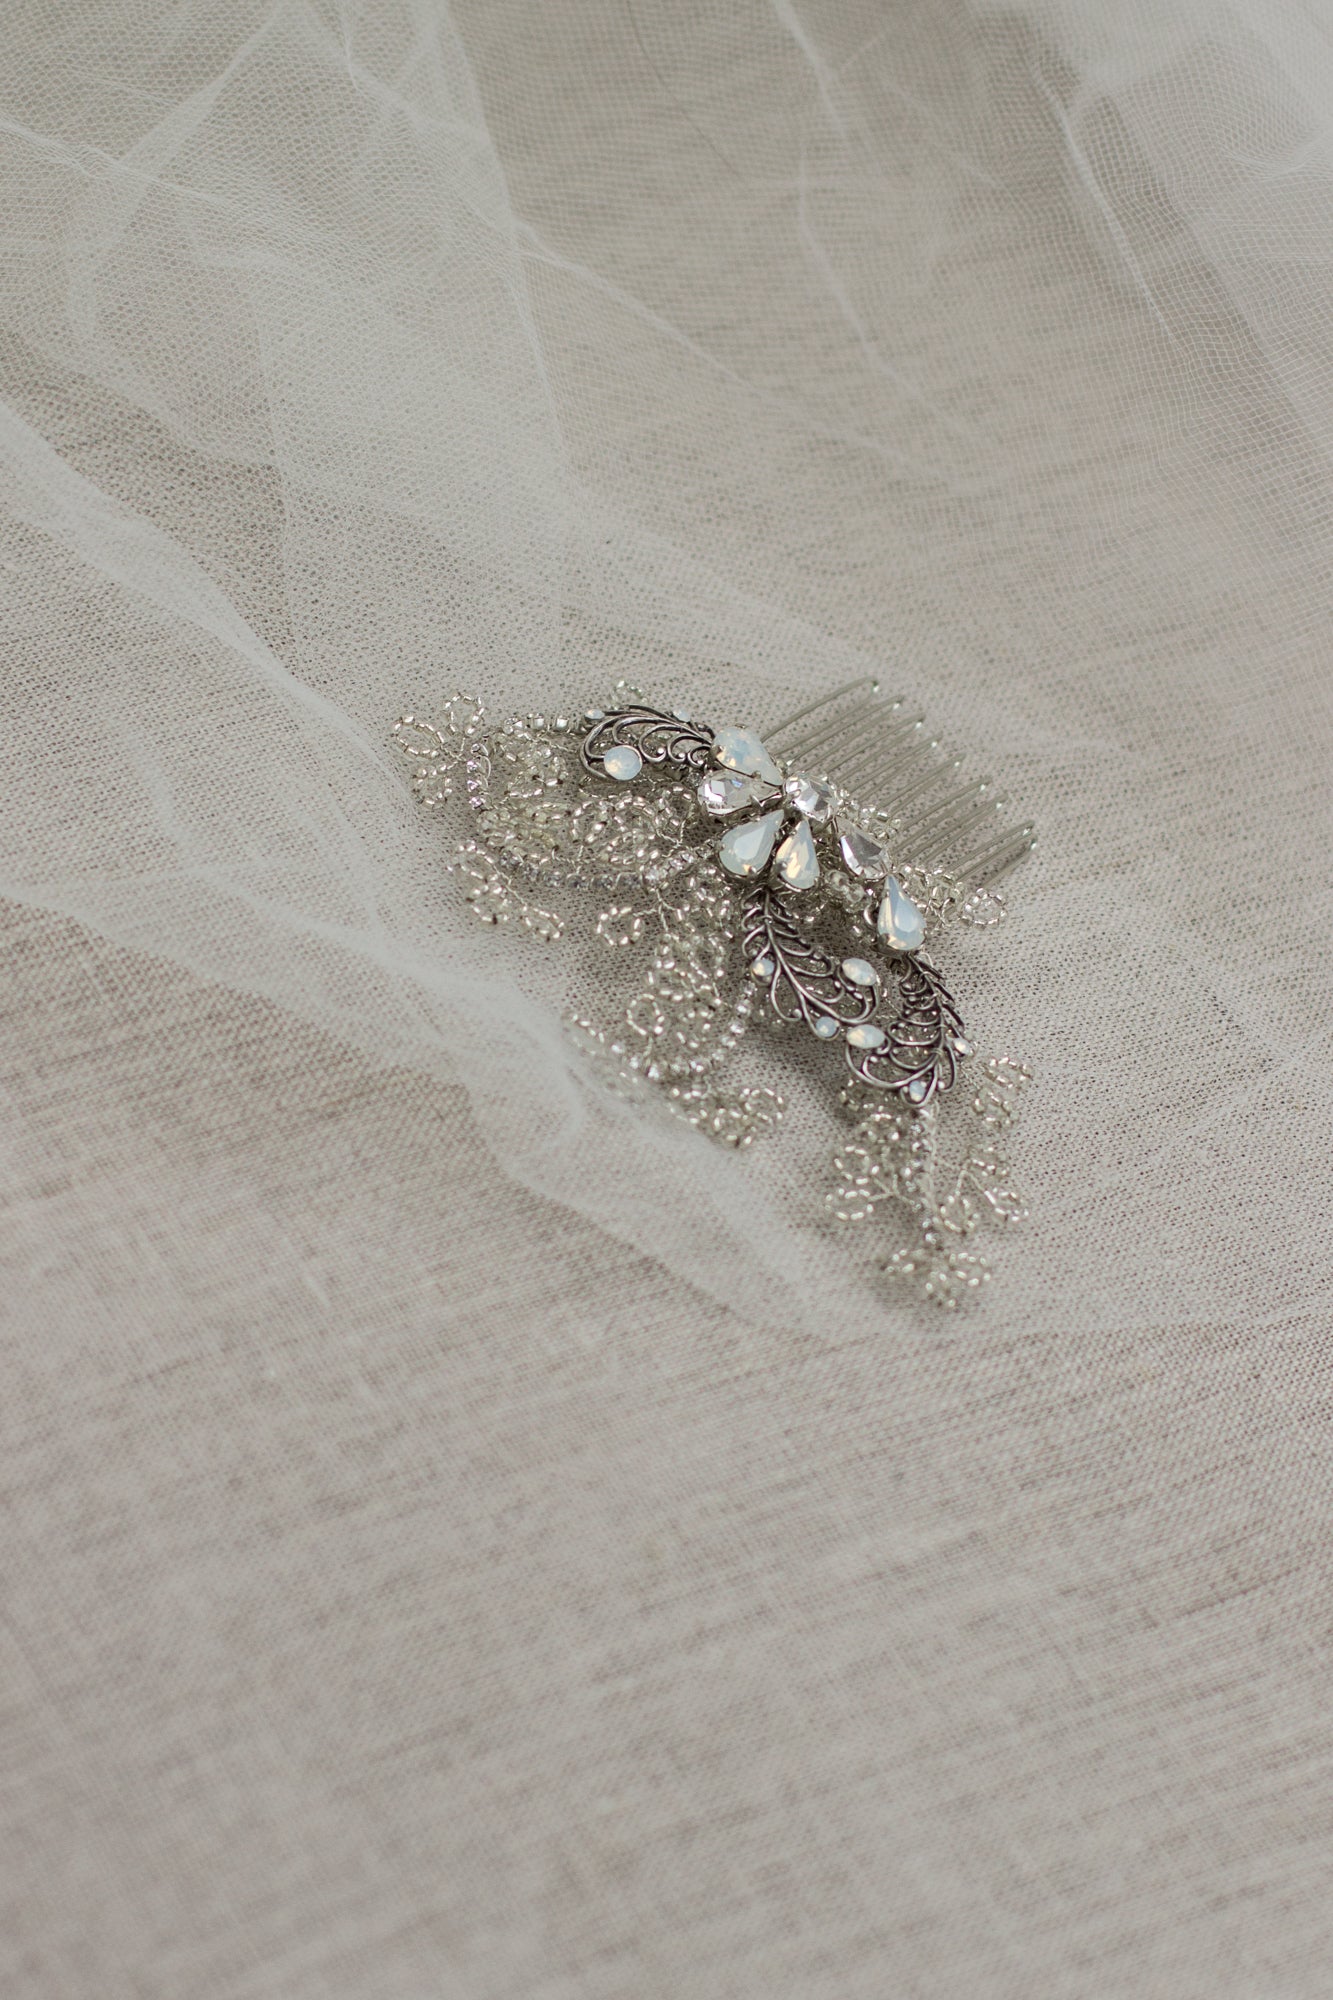 Shop online handmade wedding bridal hair accessories. Crystal Bridal hair comb decorated with stylized leaves and twigs. One of a kind Wedding headpiece. Crystal hair comb. Rhinestone hair comb. Silver headpiece. Wedding hair fascinator.